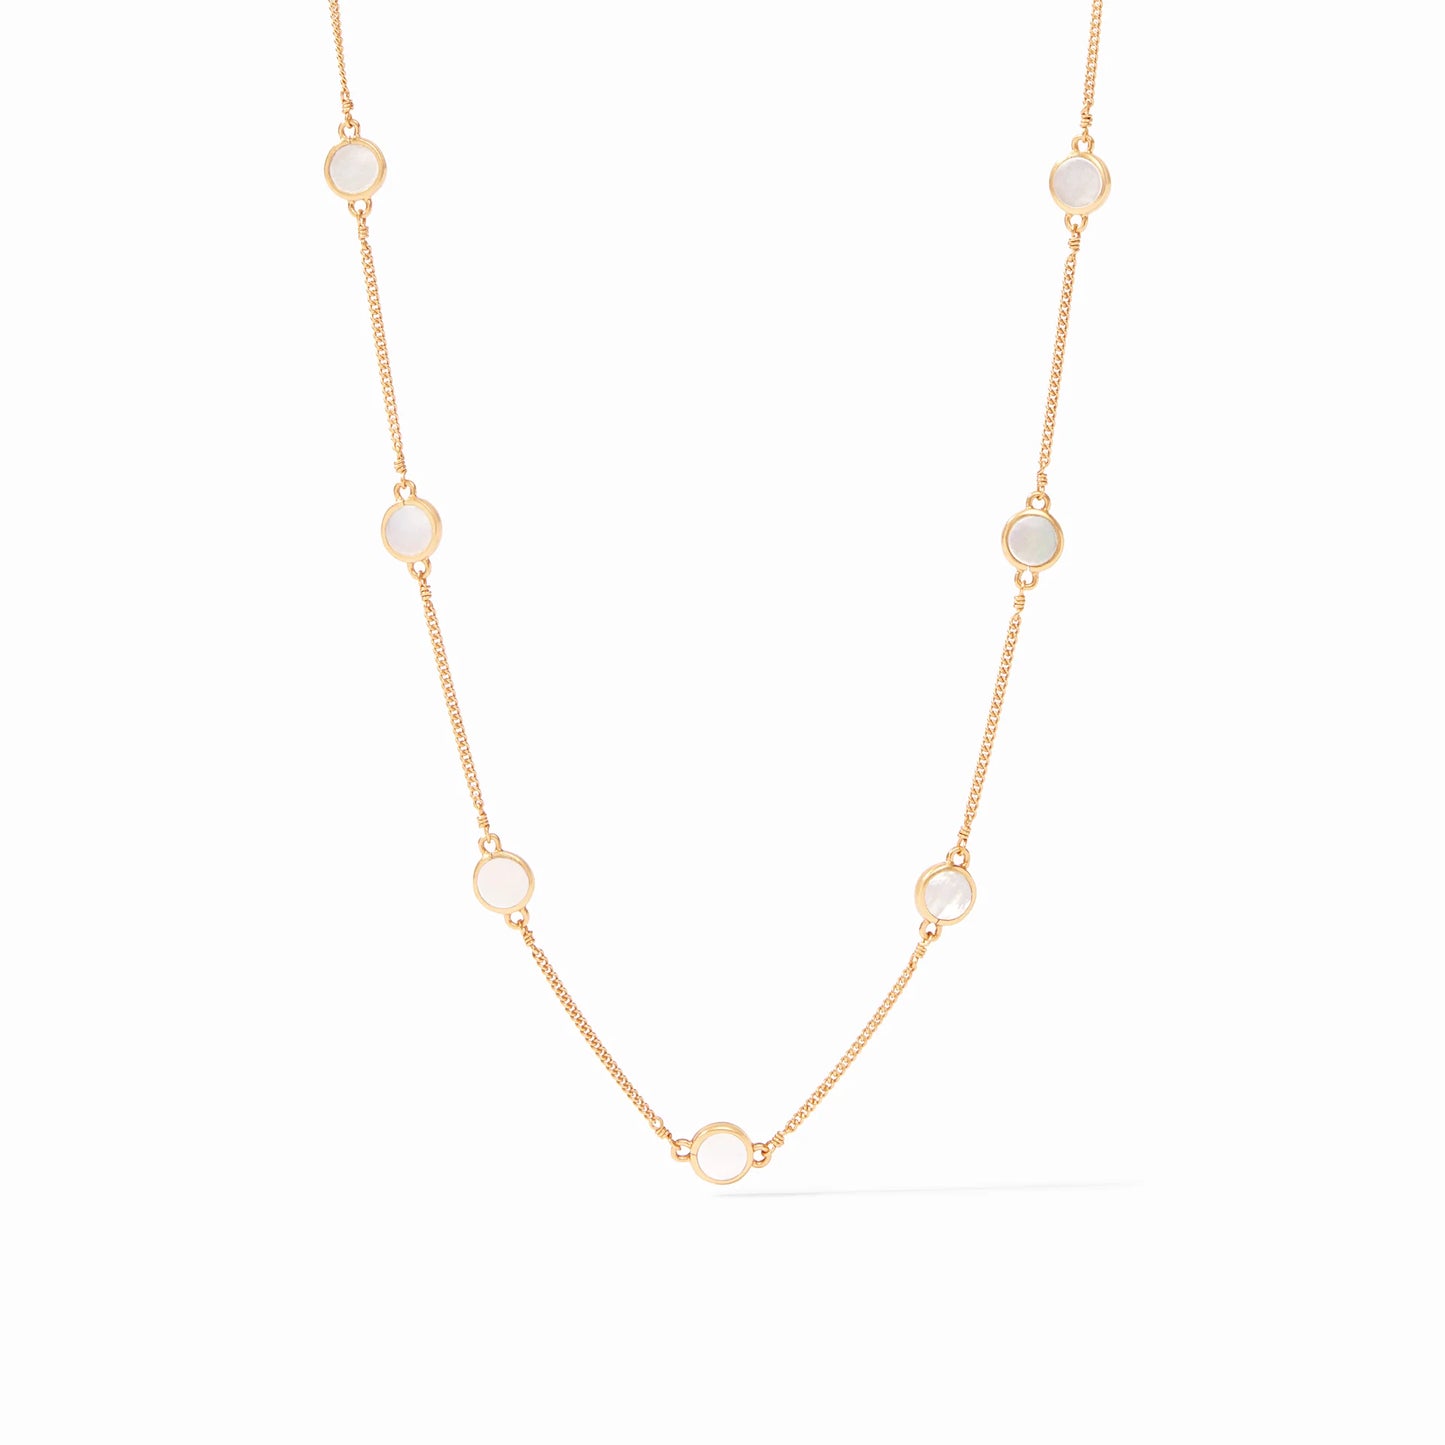 Valencia Delicate Station Necklace - Gold/Pearl